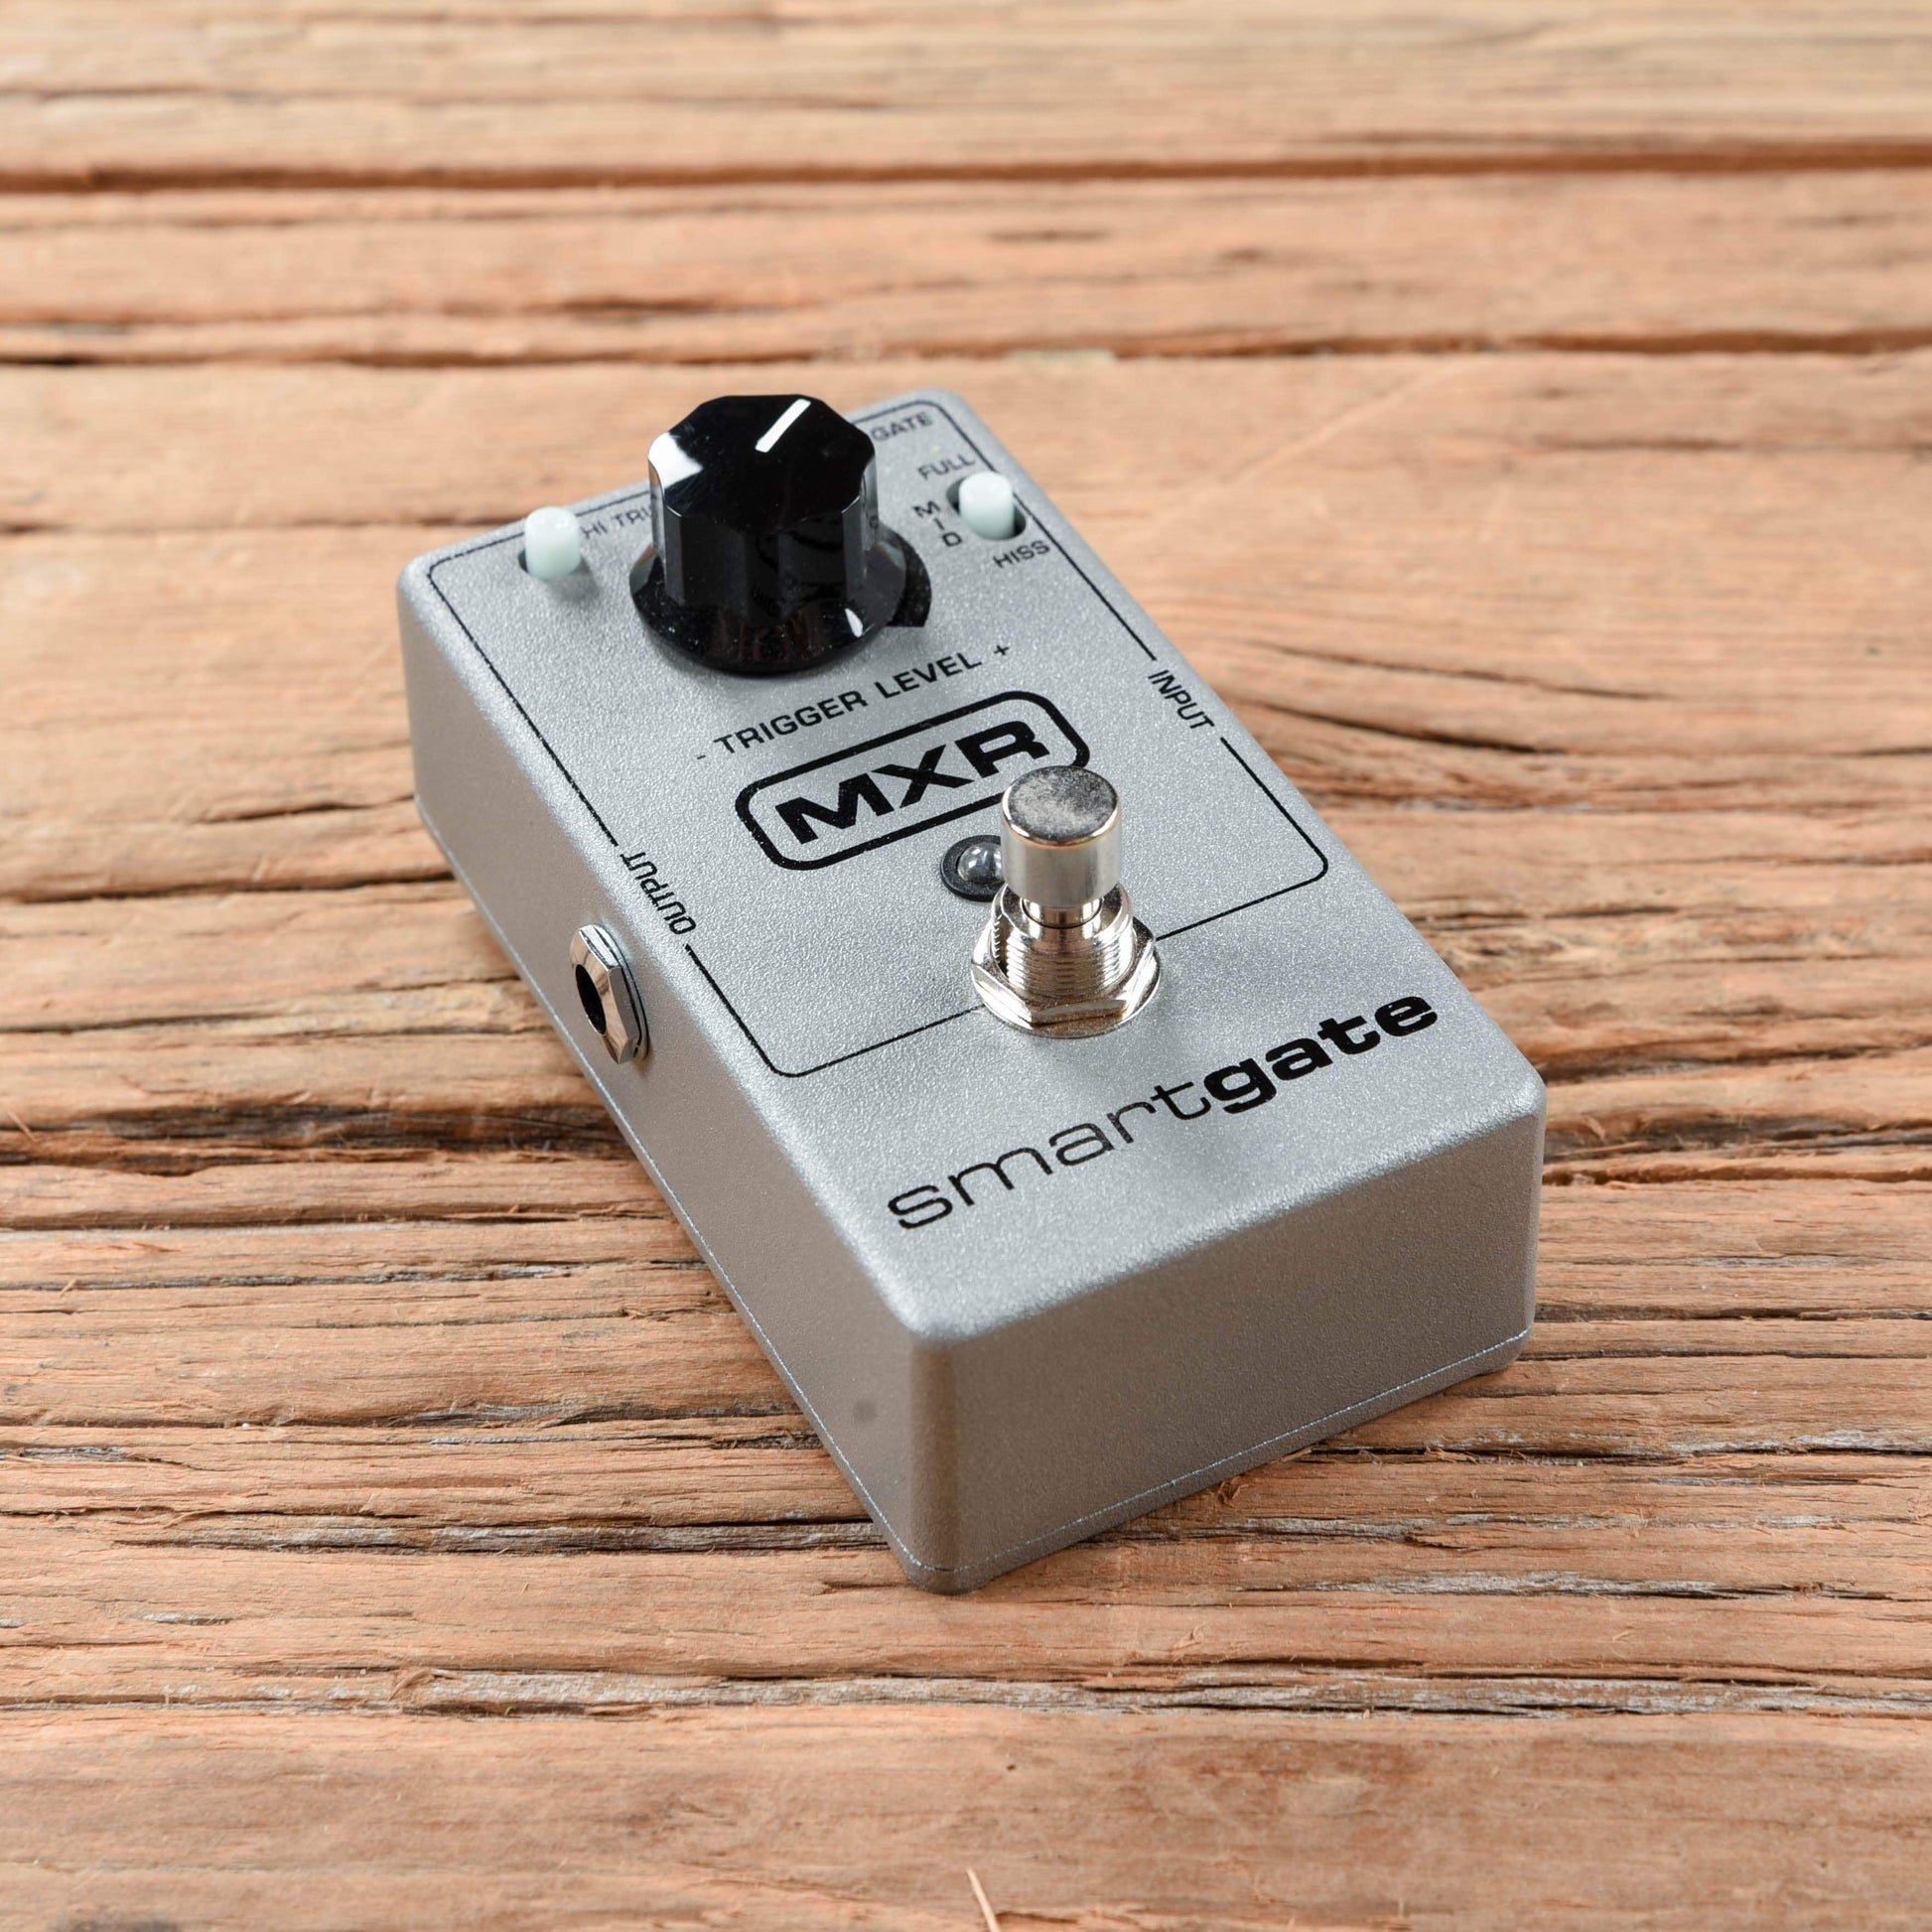 MXR M135 Smart Gate Pedal Effects and Pedals / Compression and Sustain